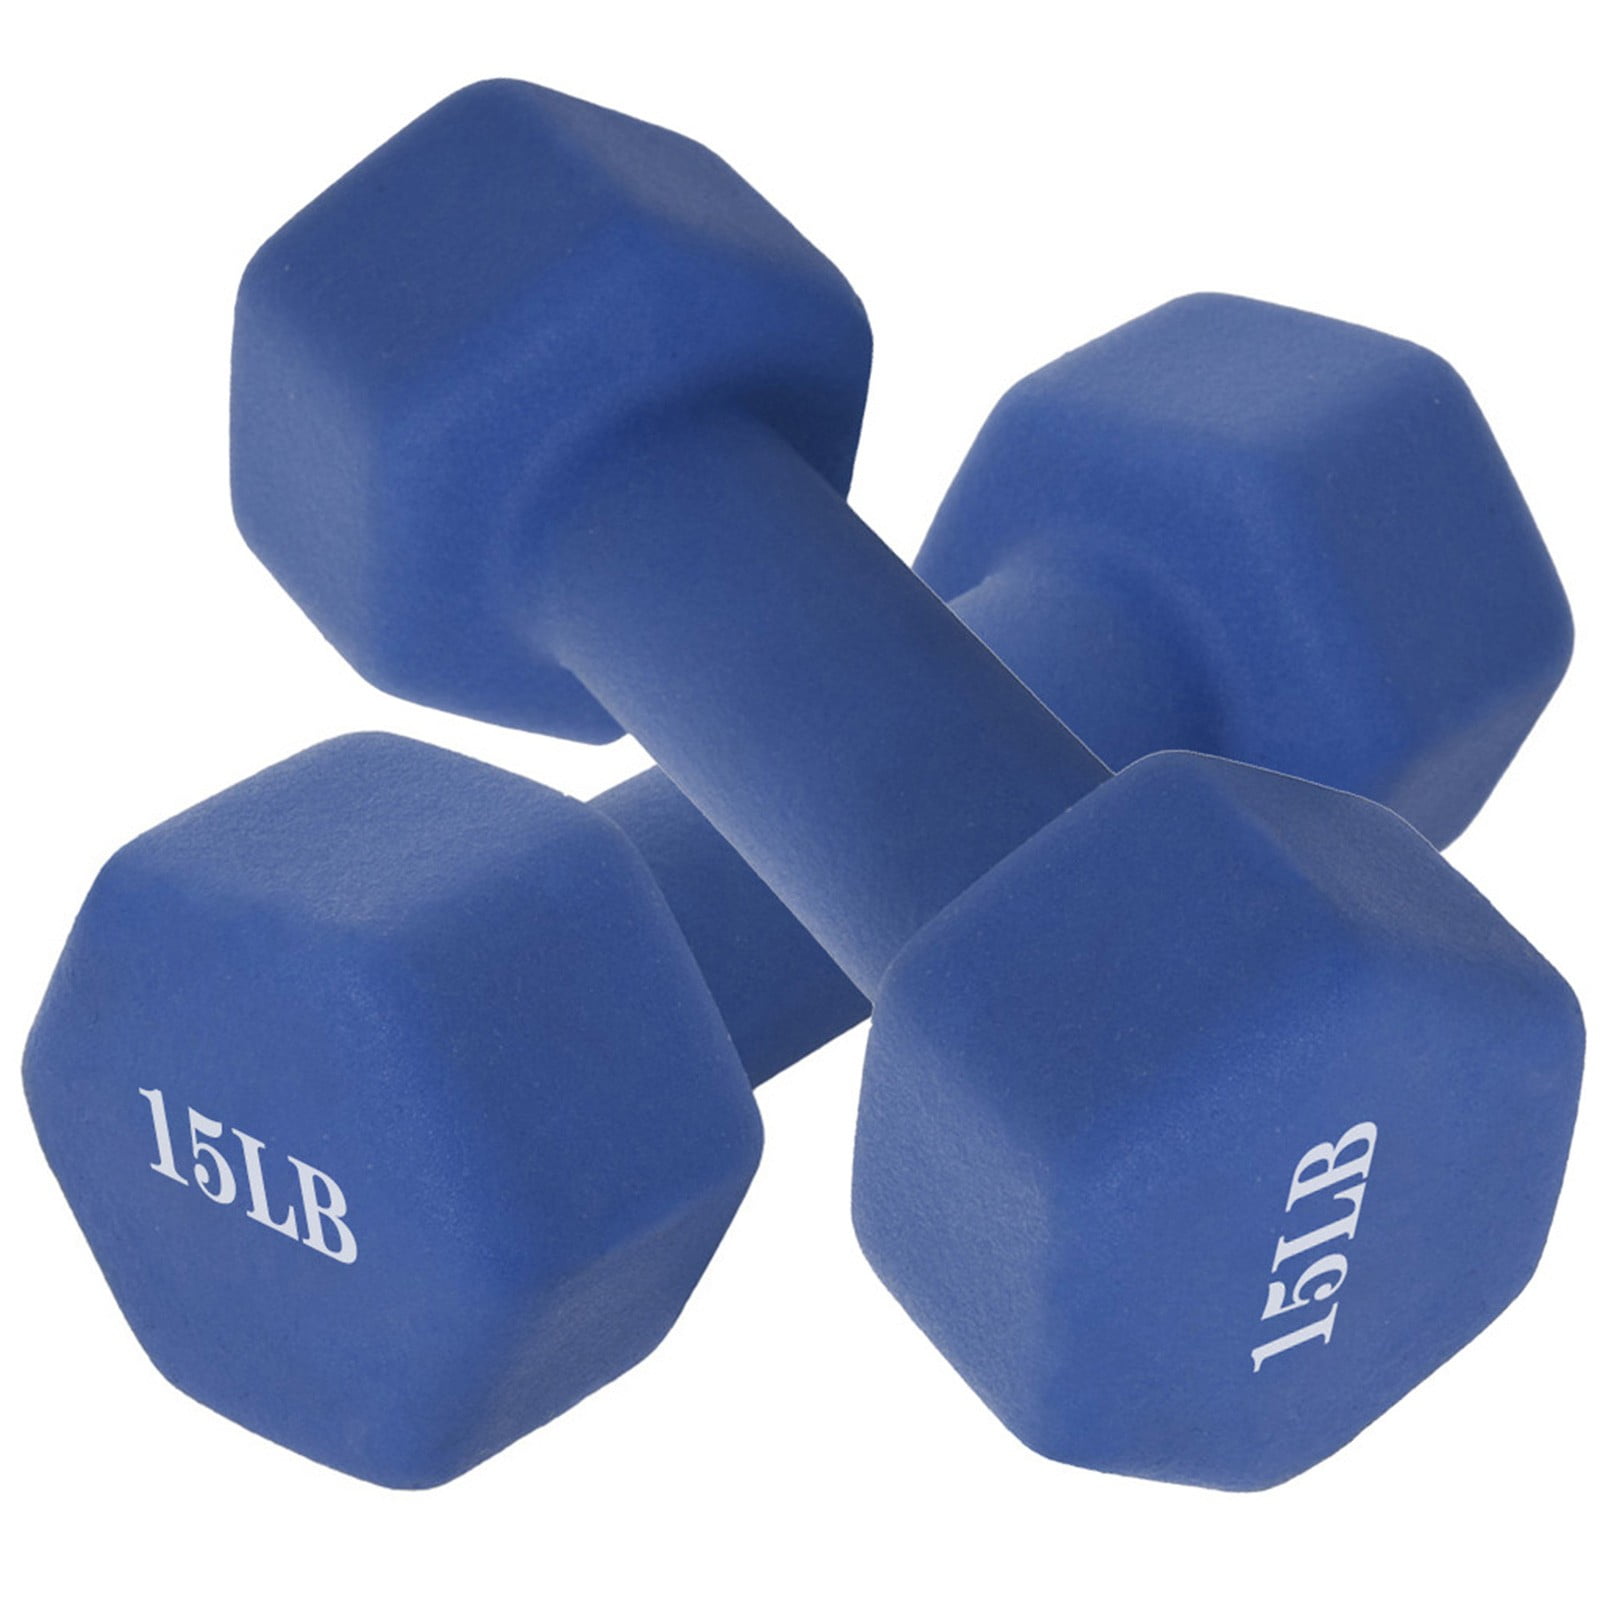 Details about   Dumbbell Set Weight Plates Comfortable Home Fitness Equipment Kettlebell 